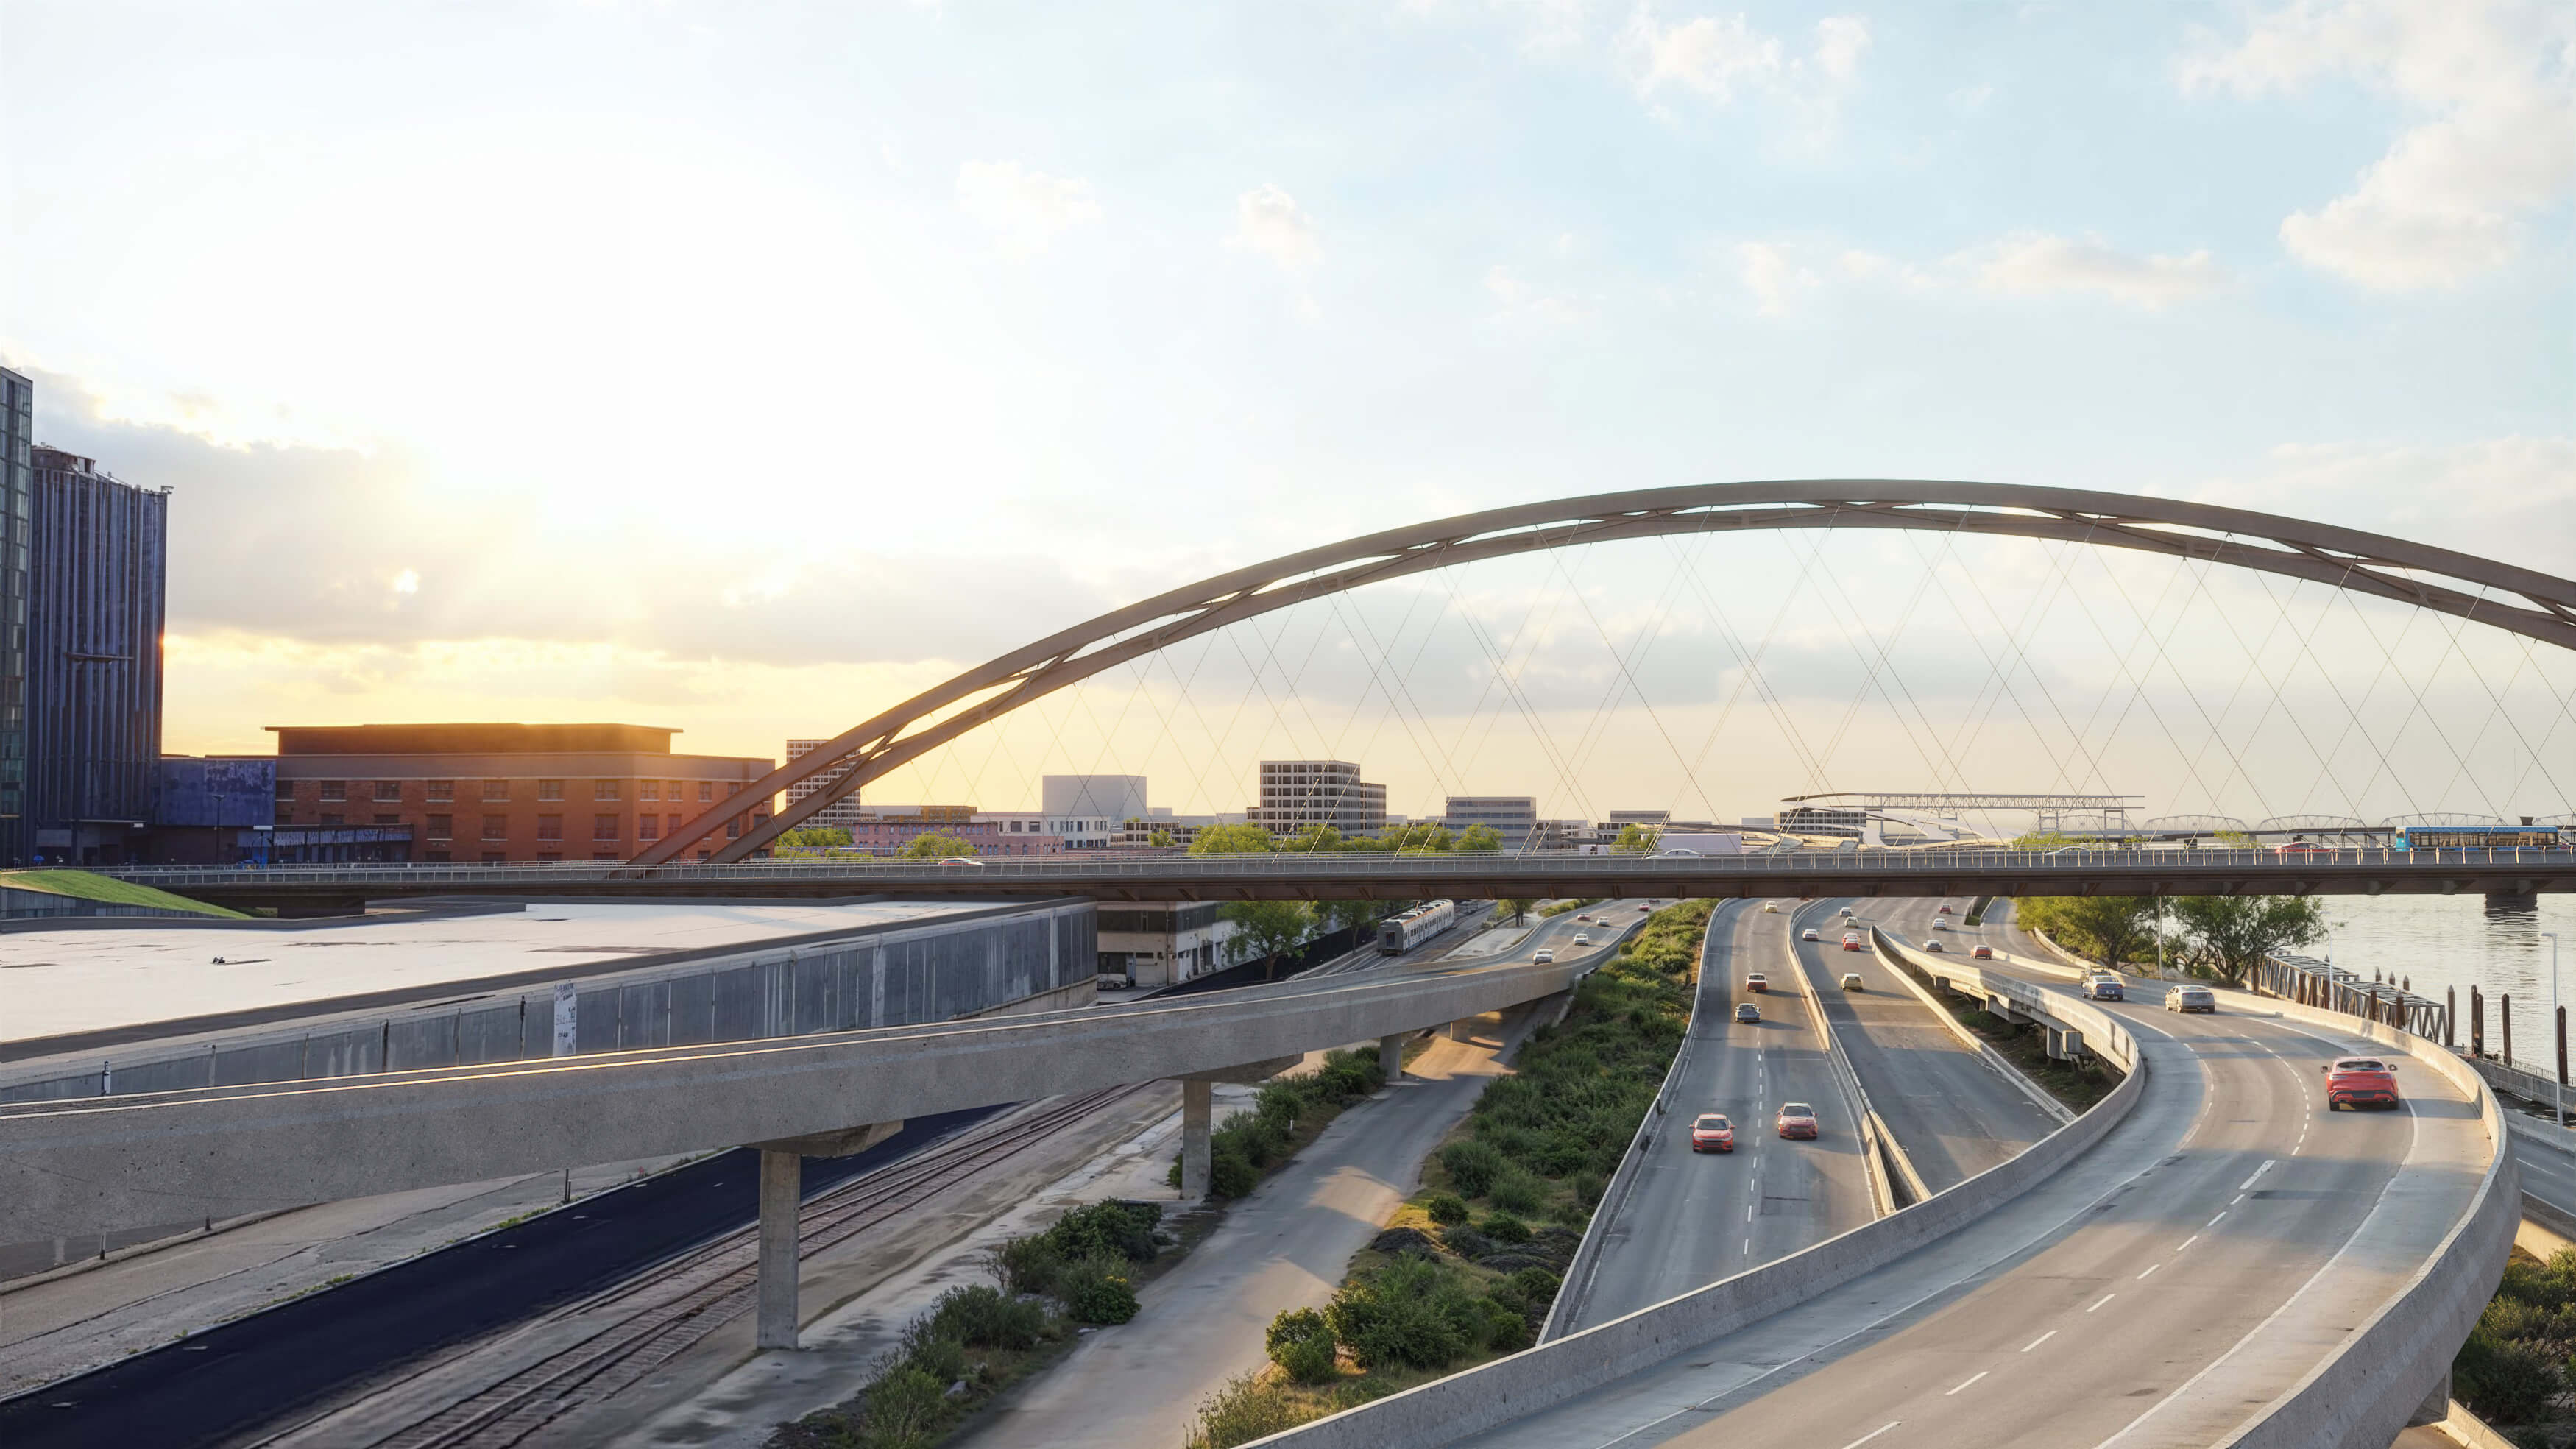 Bridge placement comparison (south view): Shows the arch straddling the I-5 corridor.